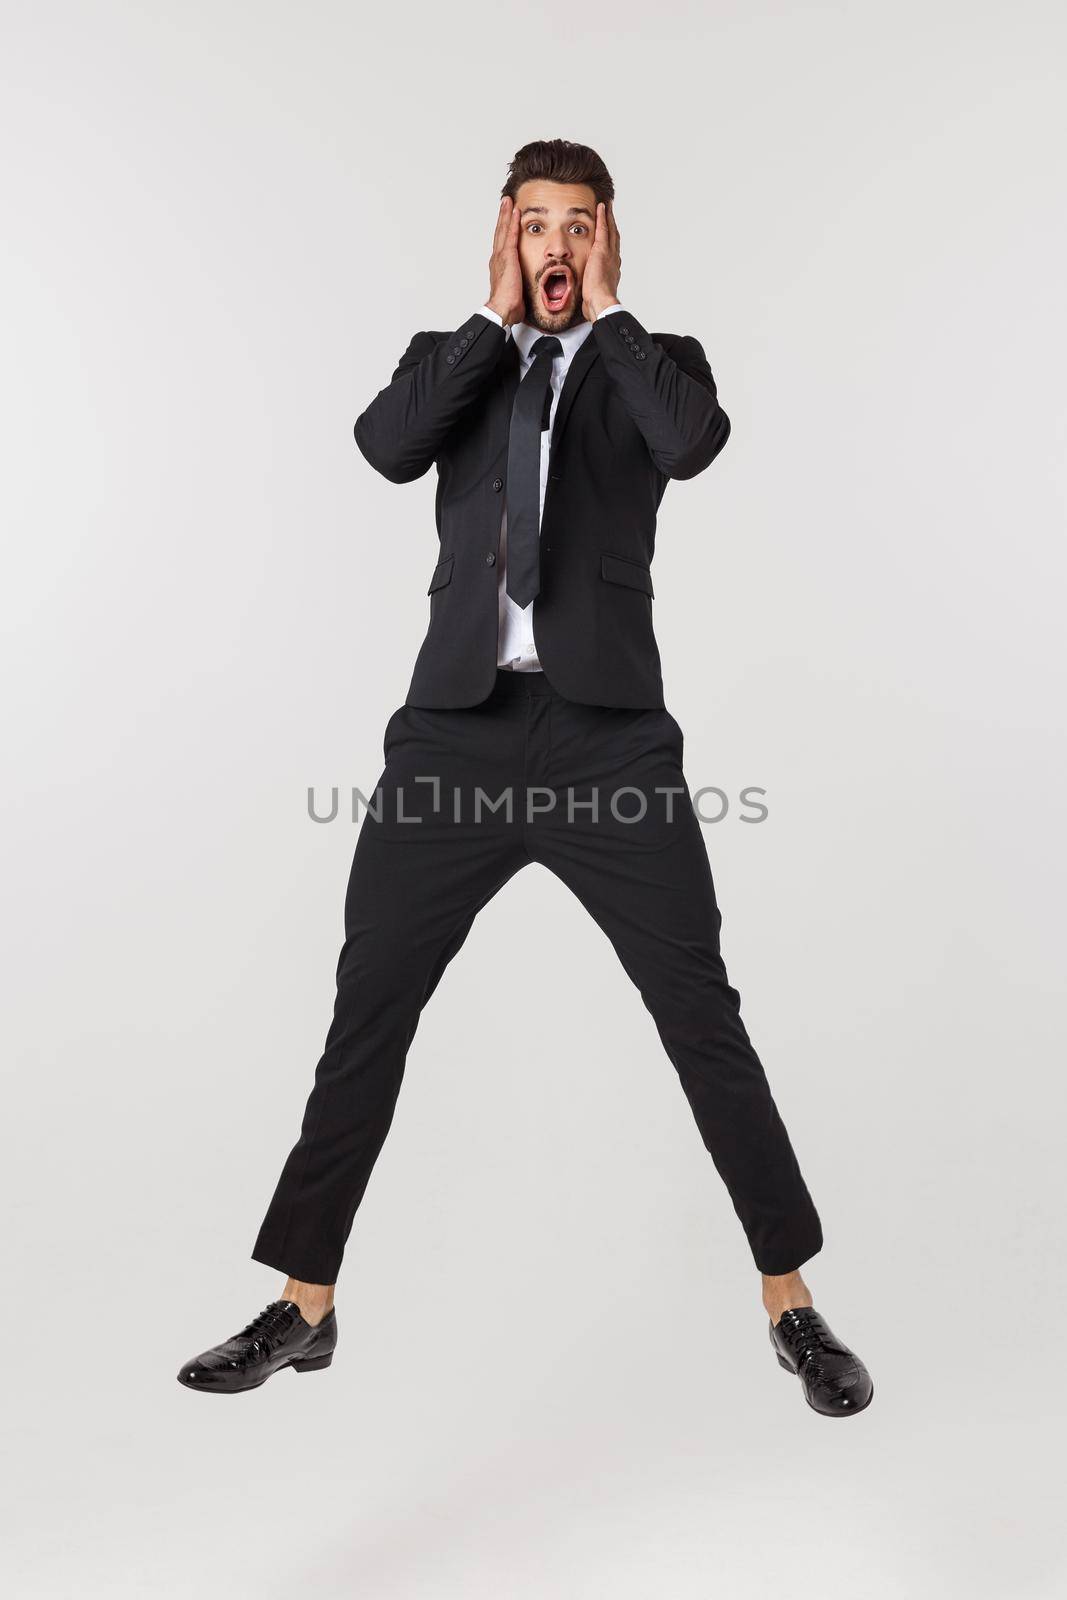 Portrait of a happy businessman jumping in air against isolated white background